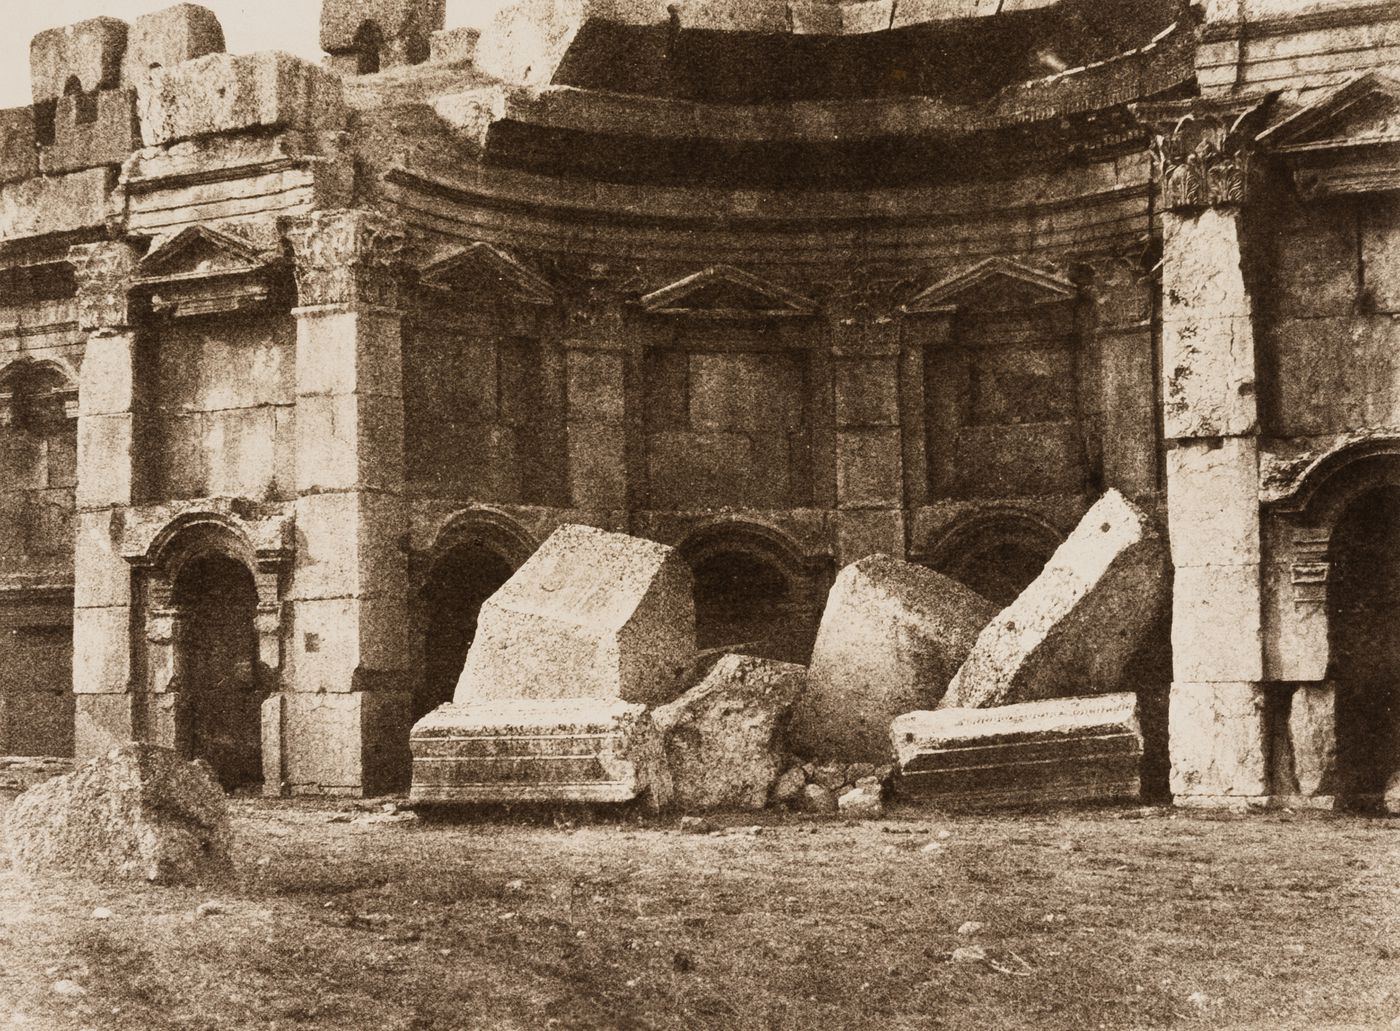 View of a semicircular structure in the ruins of the Temple to Jupiter, Baalbek, Ottoman Empire (now in Lebanon)